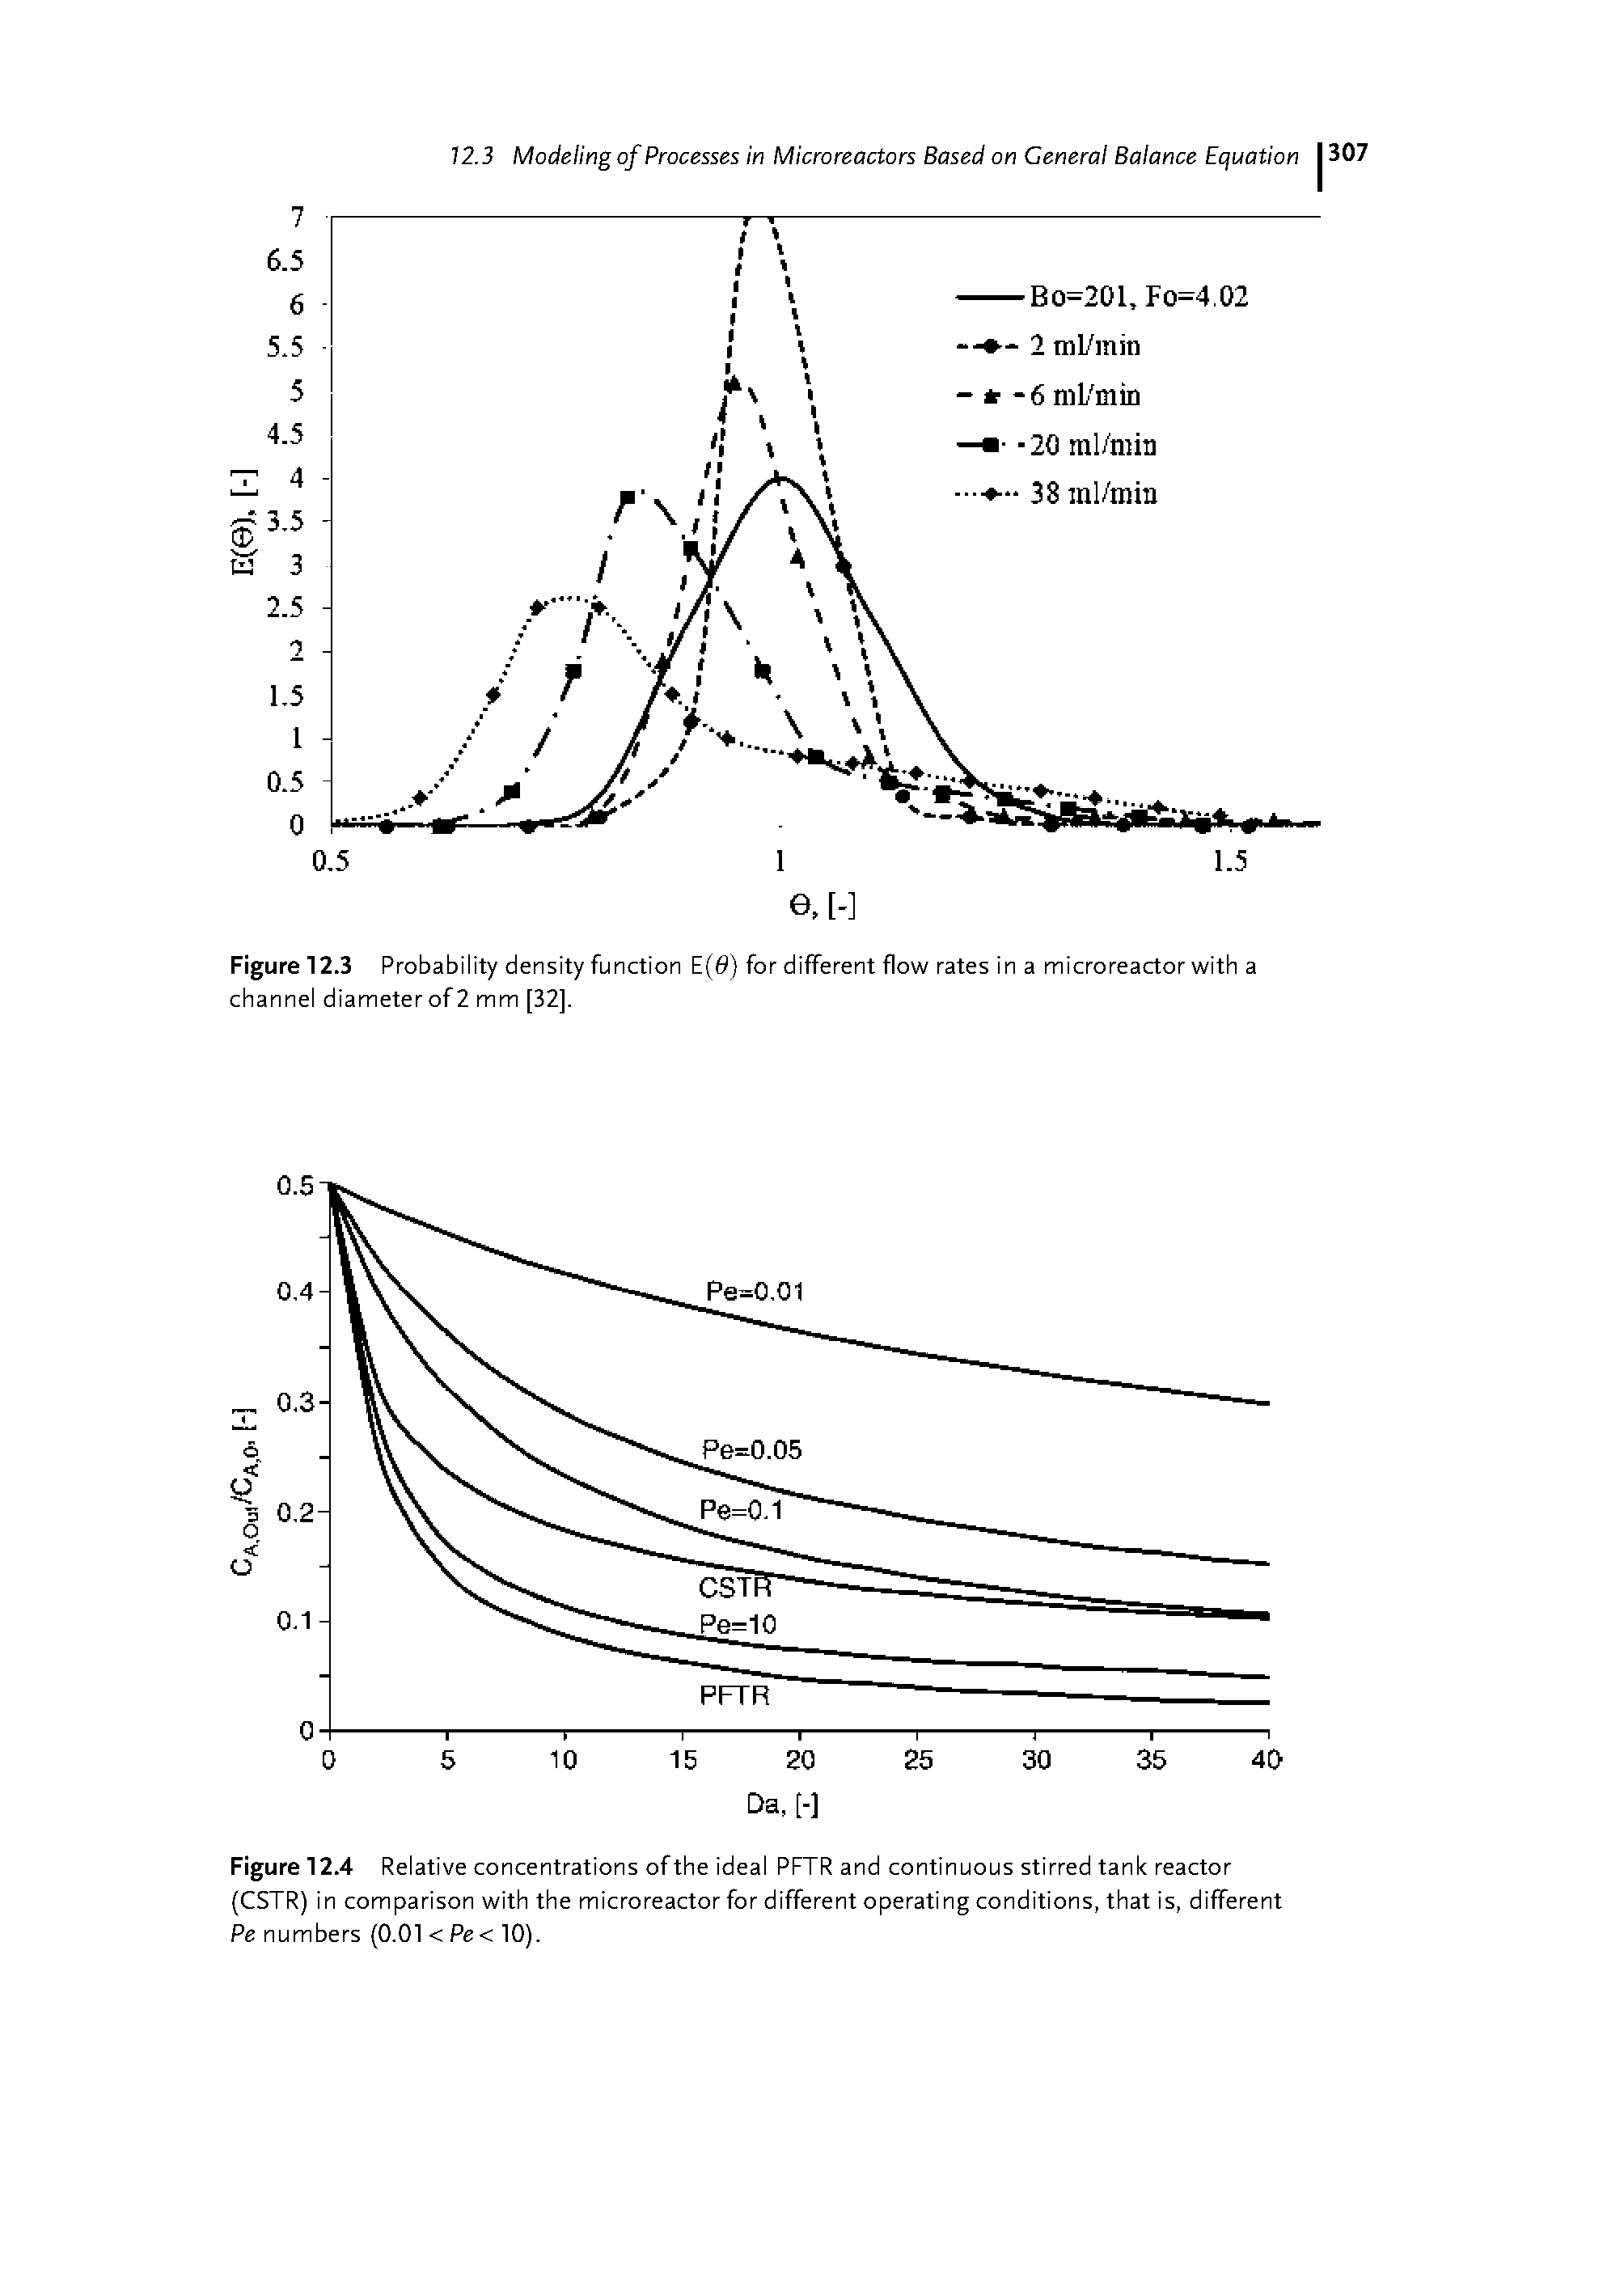 Figure 12.4 Relative concentrations ofthe ideal PFTR and continuous stirred tank reactor (CSTR) in comparison with the microreactor for different operating conditions, that is, different Pe numbers (0.01 <Pe< 10).